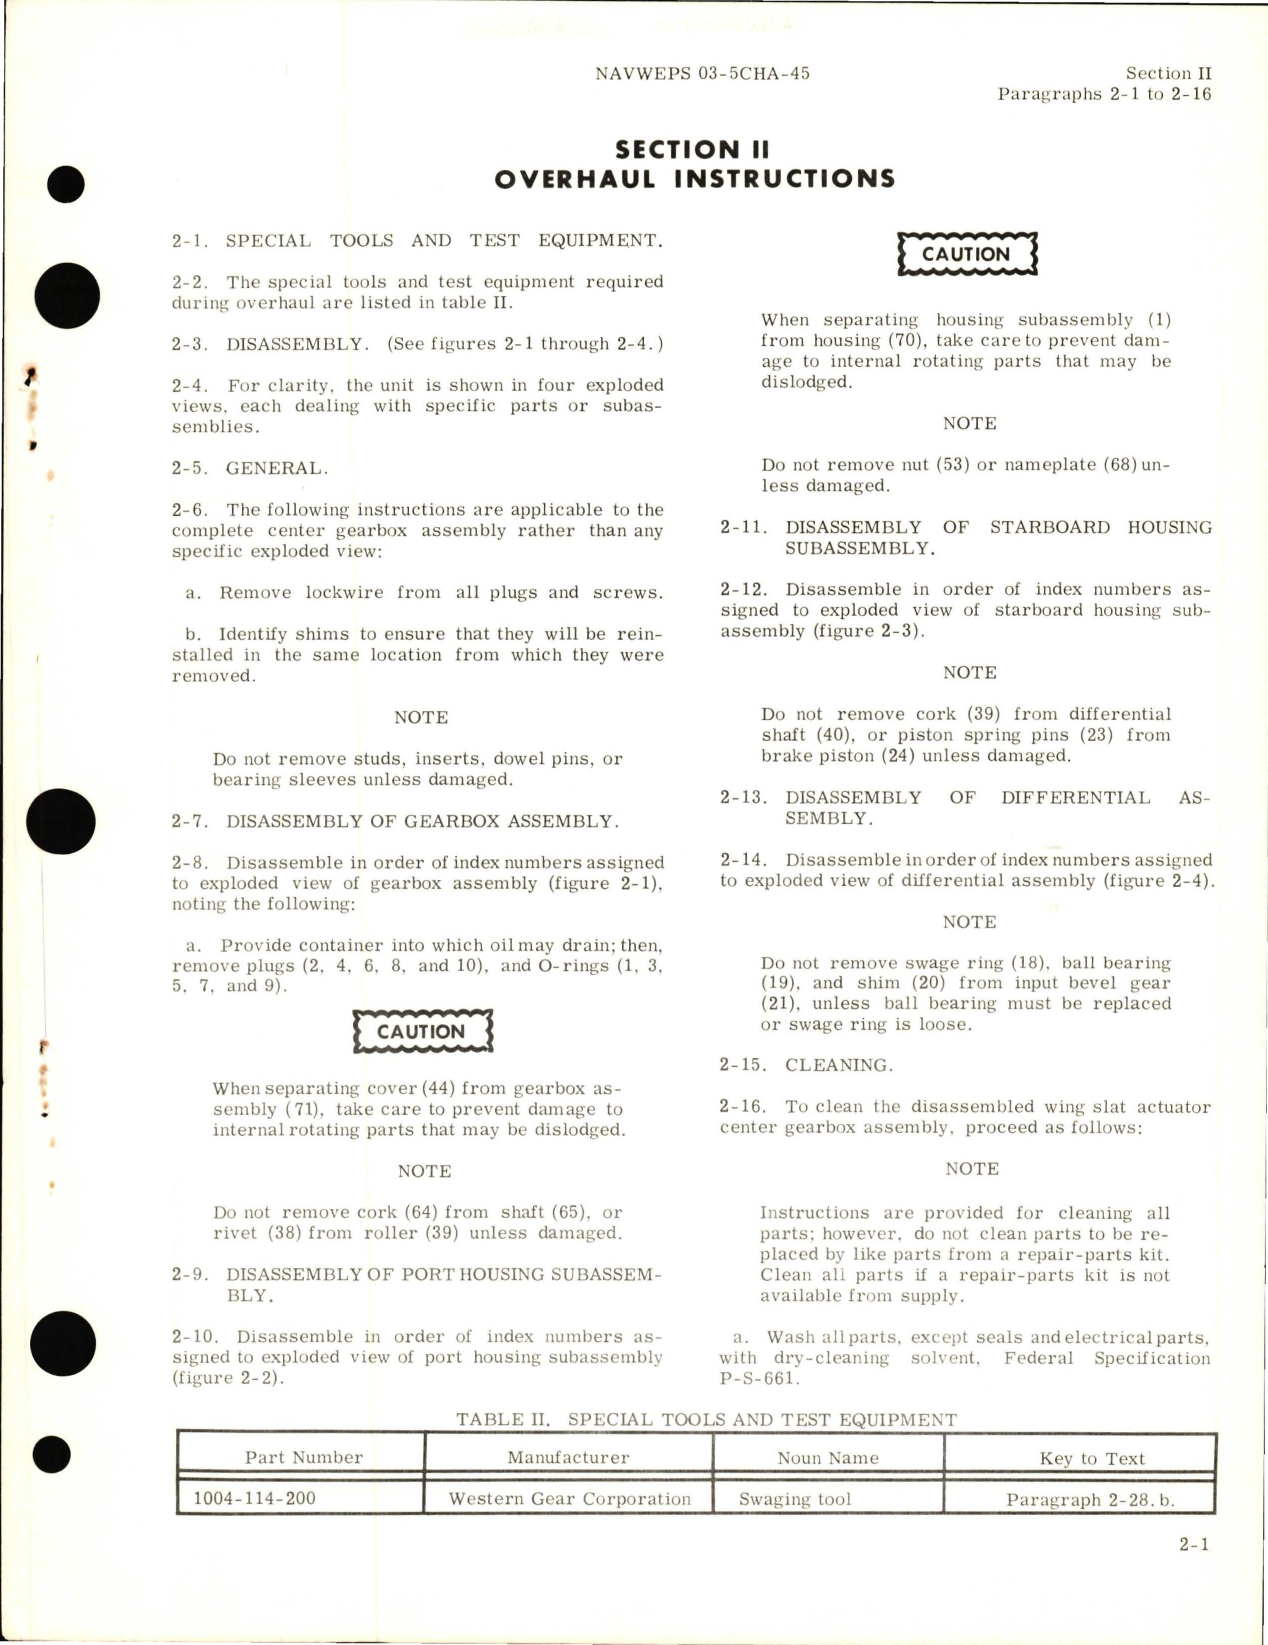 Sample page 5 from AirCorps Library document: Overhaul Instructions for Wing Slat Actuator Center Gearbox Assembly - Part 1372R140 